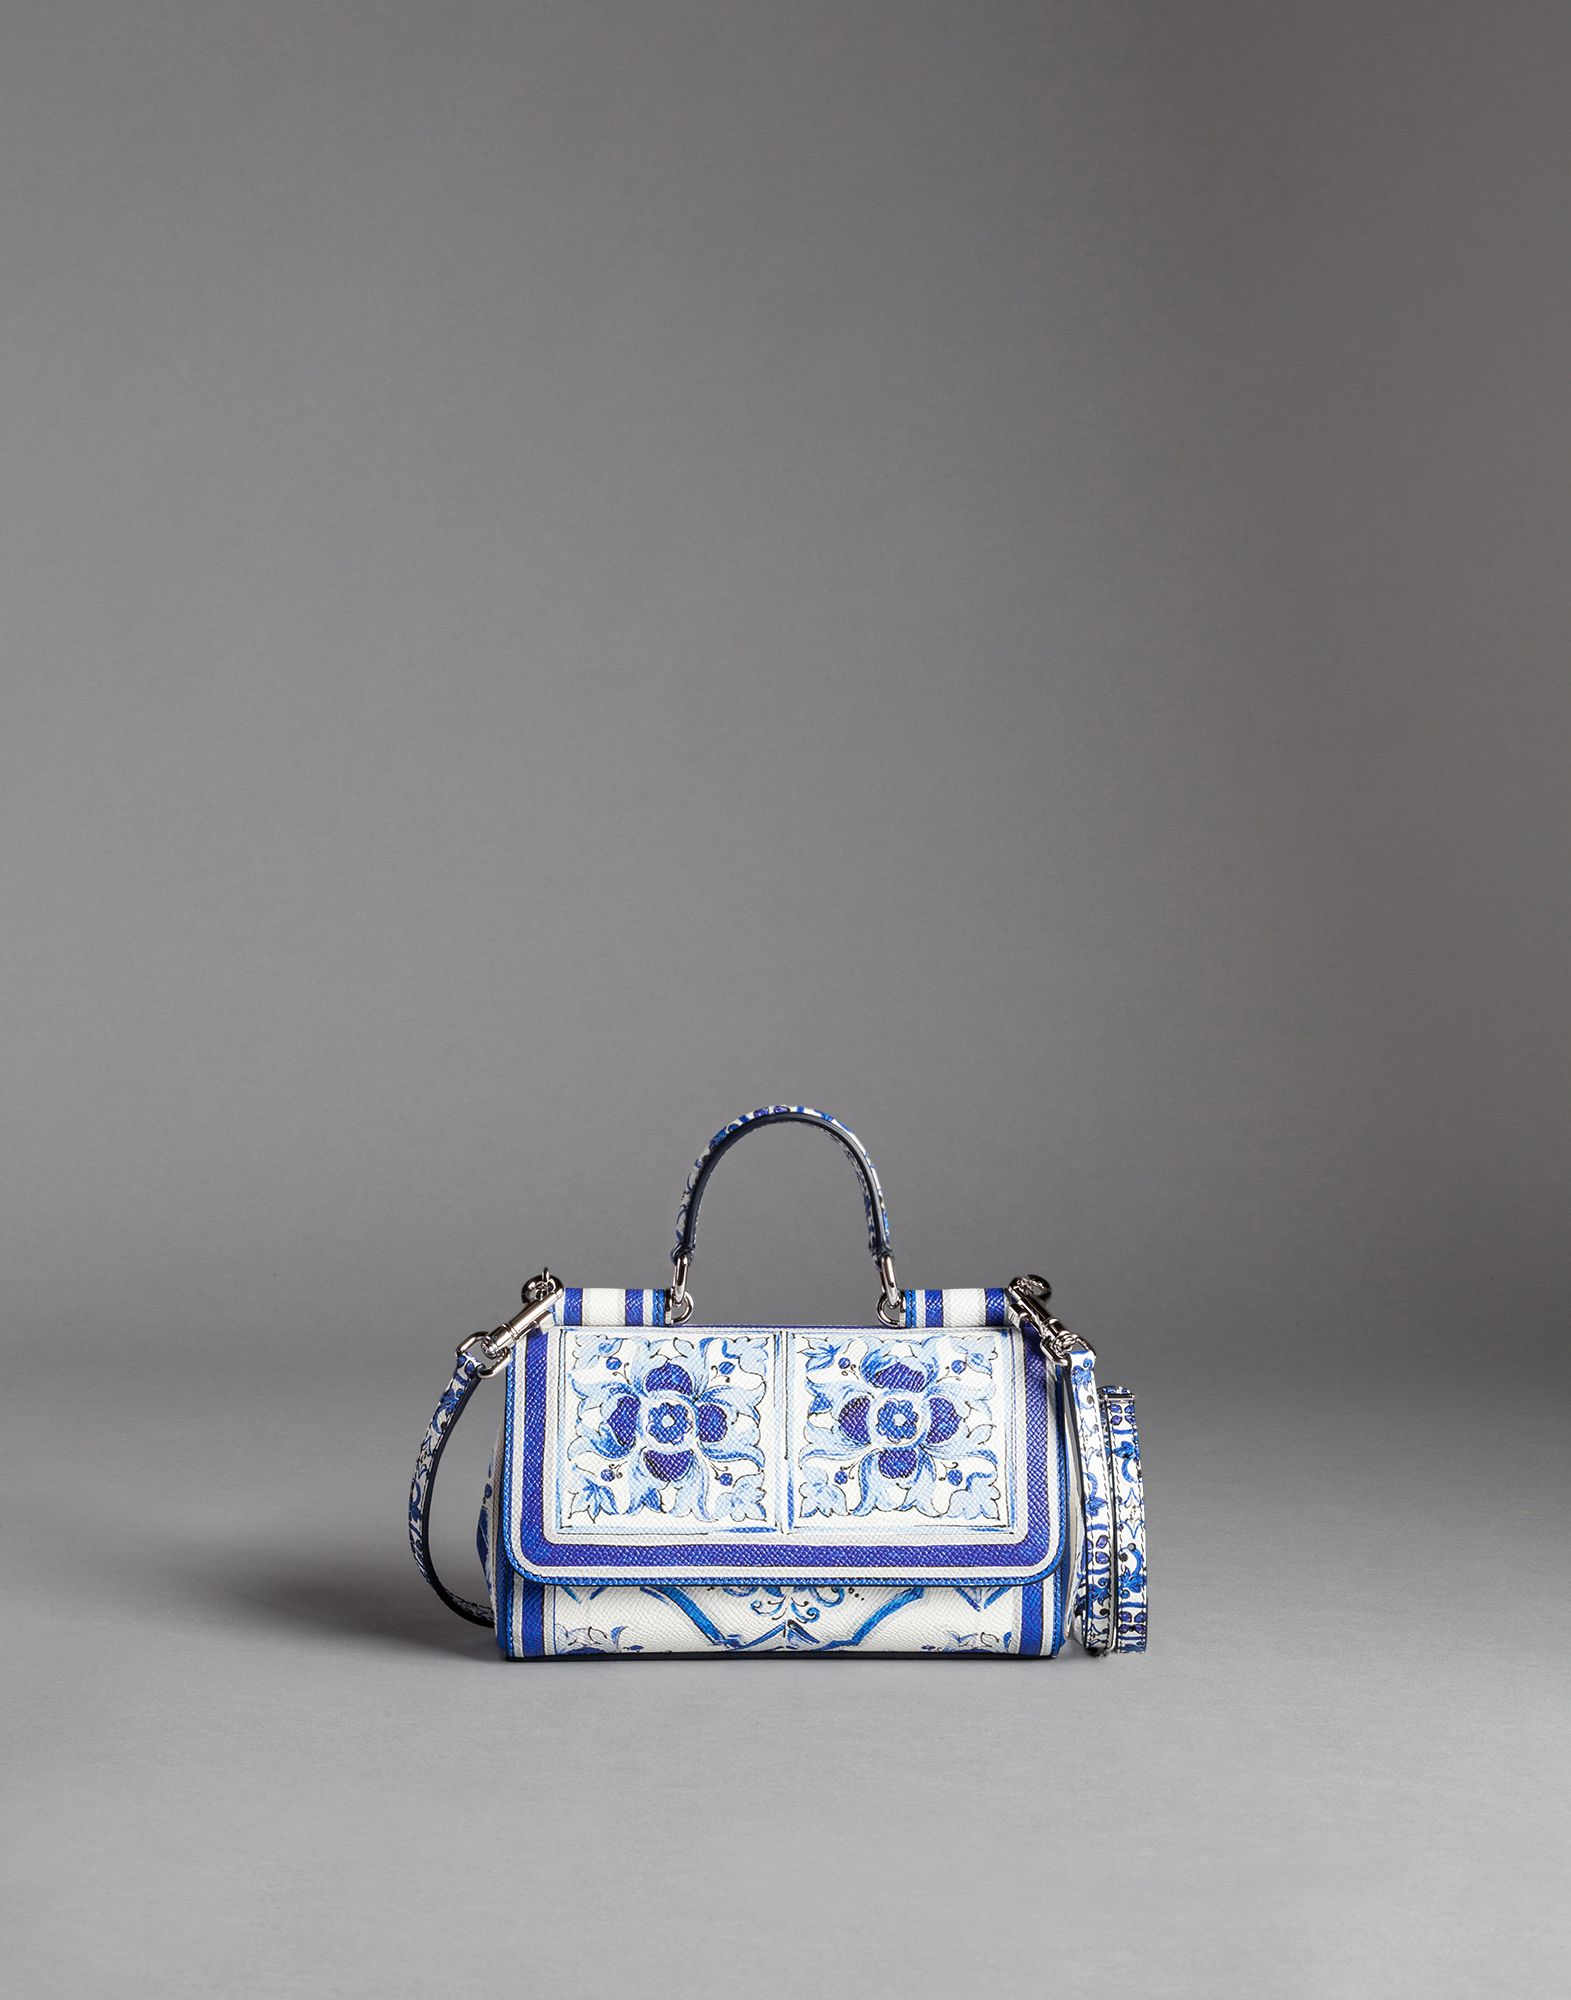 Sold at Auction: Dolce & Gabbana Dauphine Majolica Miss Sicily Bag